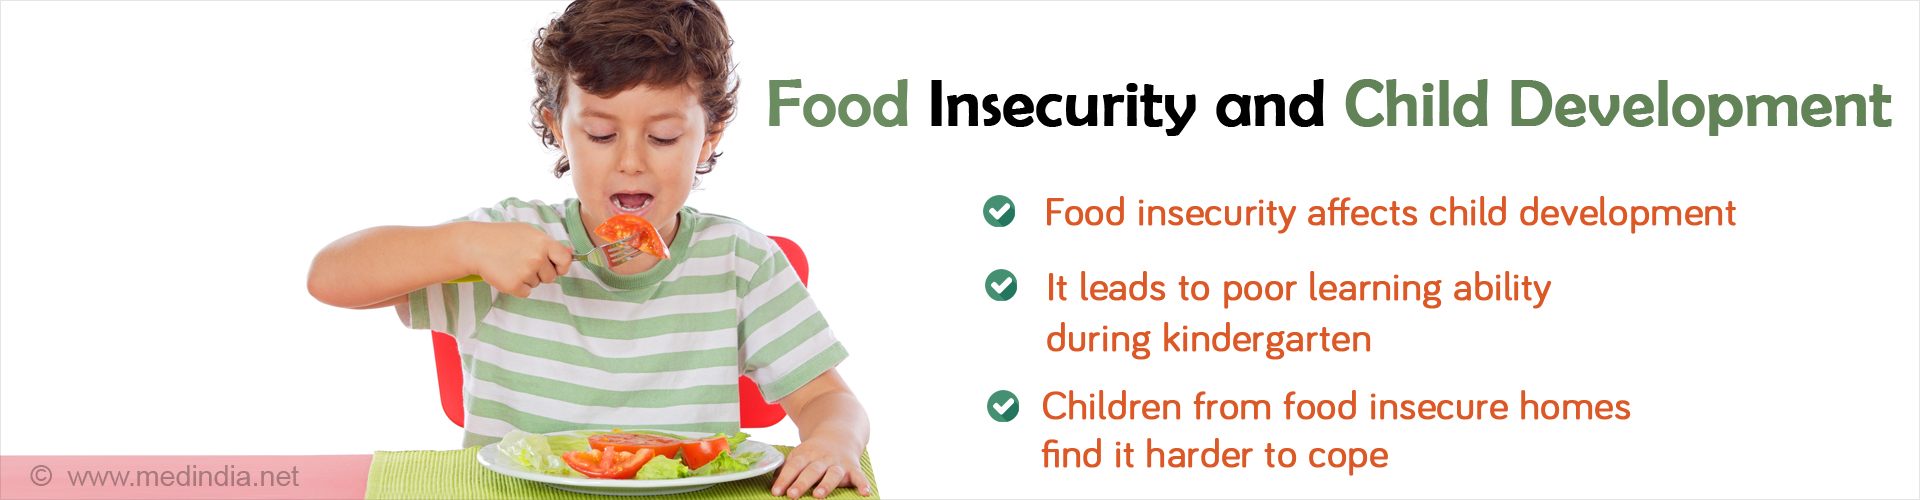 Food Insecurity and Child Development
- Food insecurity affects child development
- It leads to poor learning ability during kindergarten
- Children from food insecure homes find it harder to cope